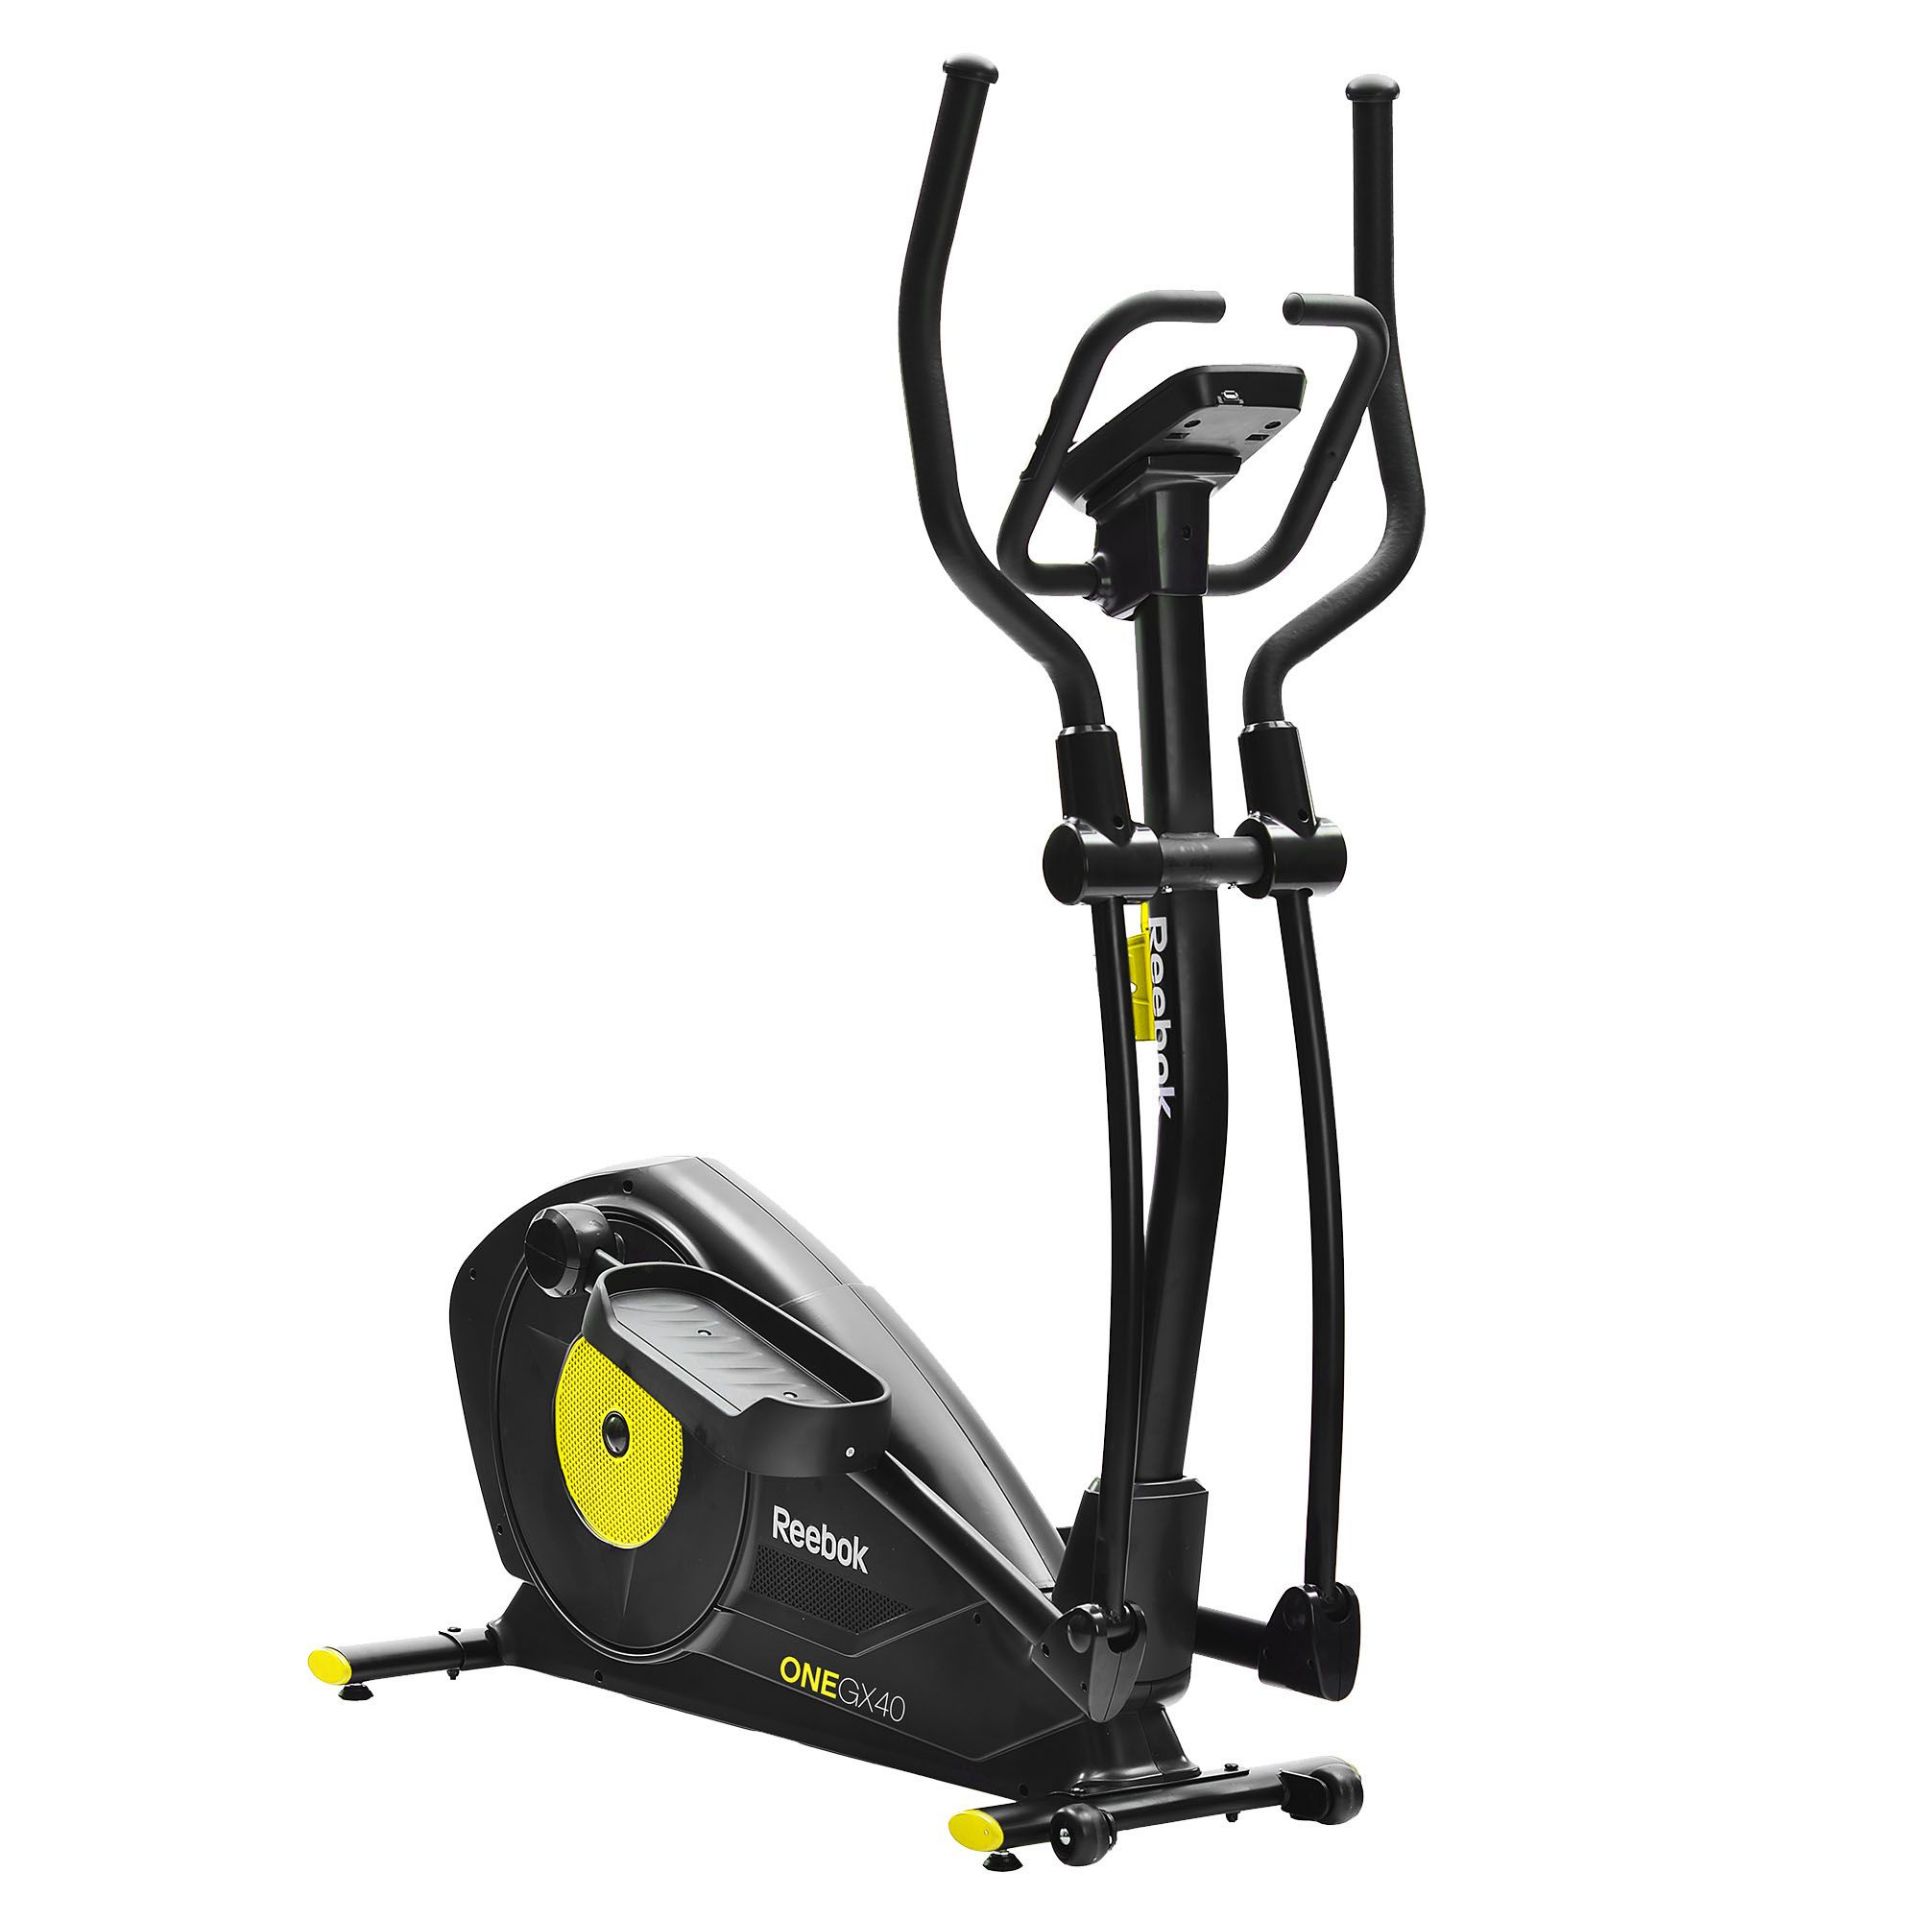 1 X BRAND NEW REEBOK ONE GX40 CROSSTRAINER IN BLACK/YELLOW - PLEASE NOTE BOX IS DAMAGED - Image 2 of 2